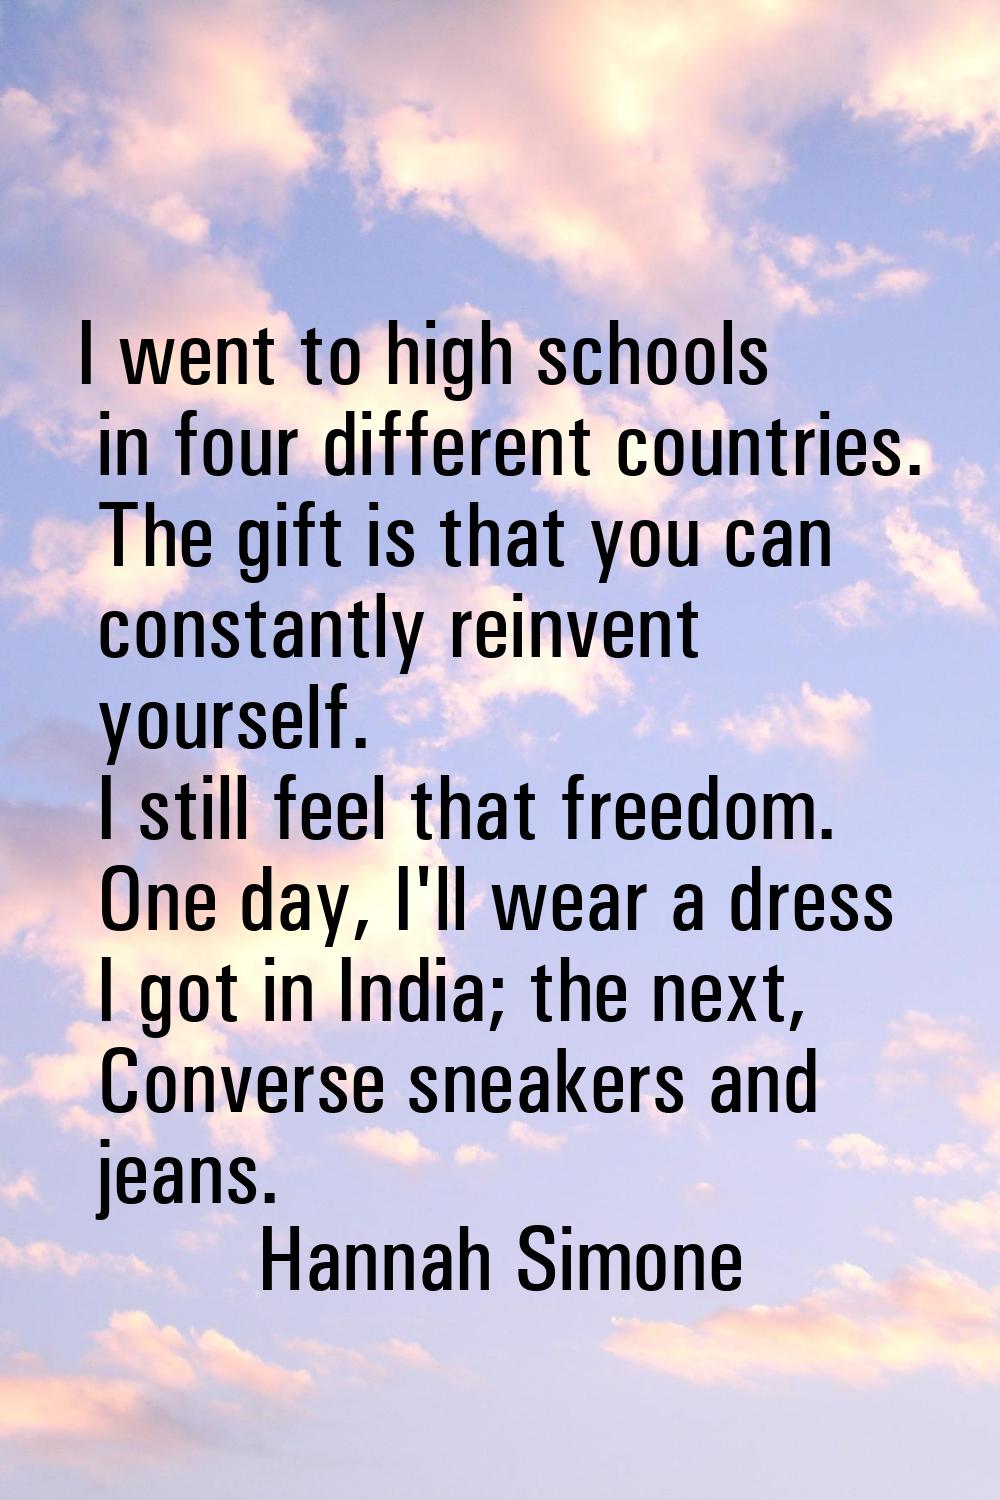 I went to high schools in four different countries. The gift is that you can constantly reinvent yo